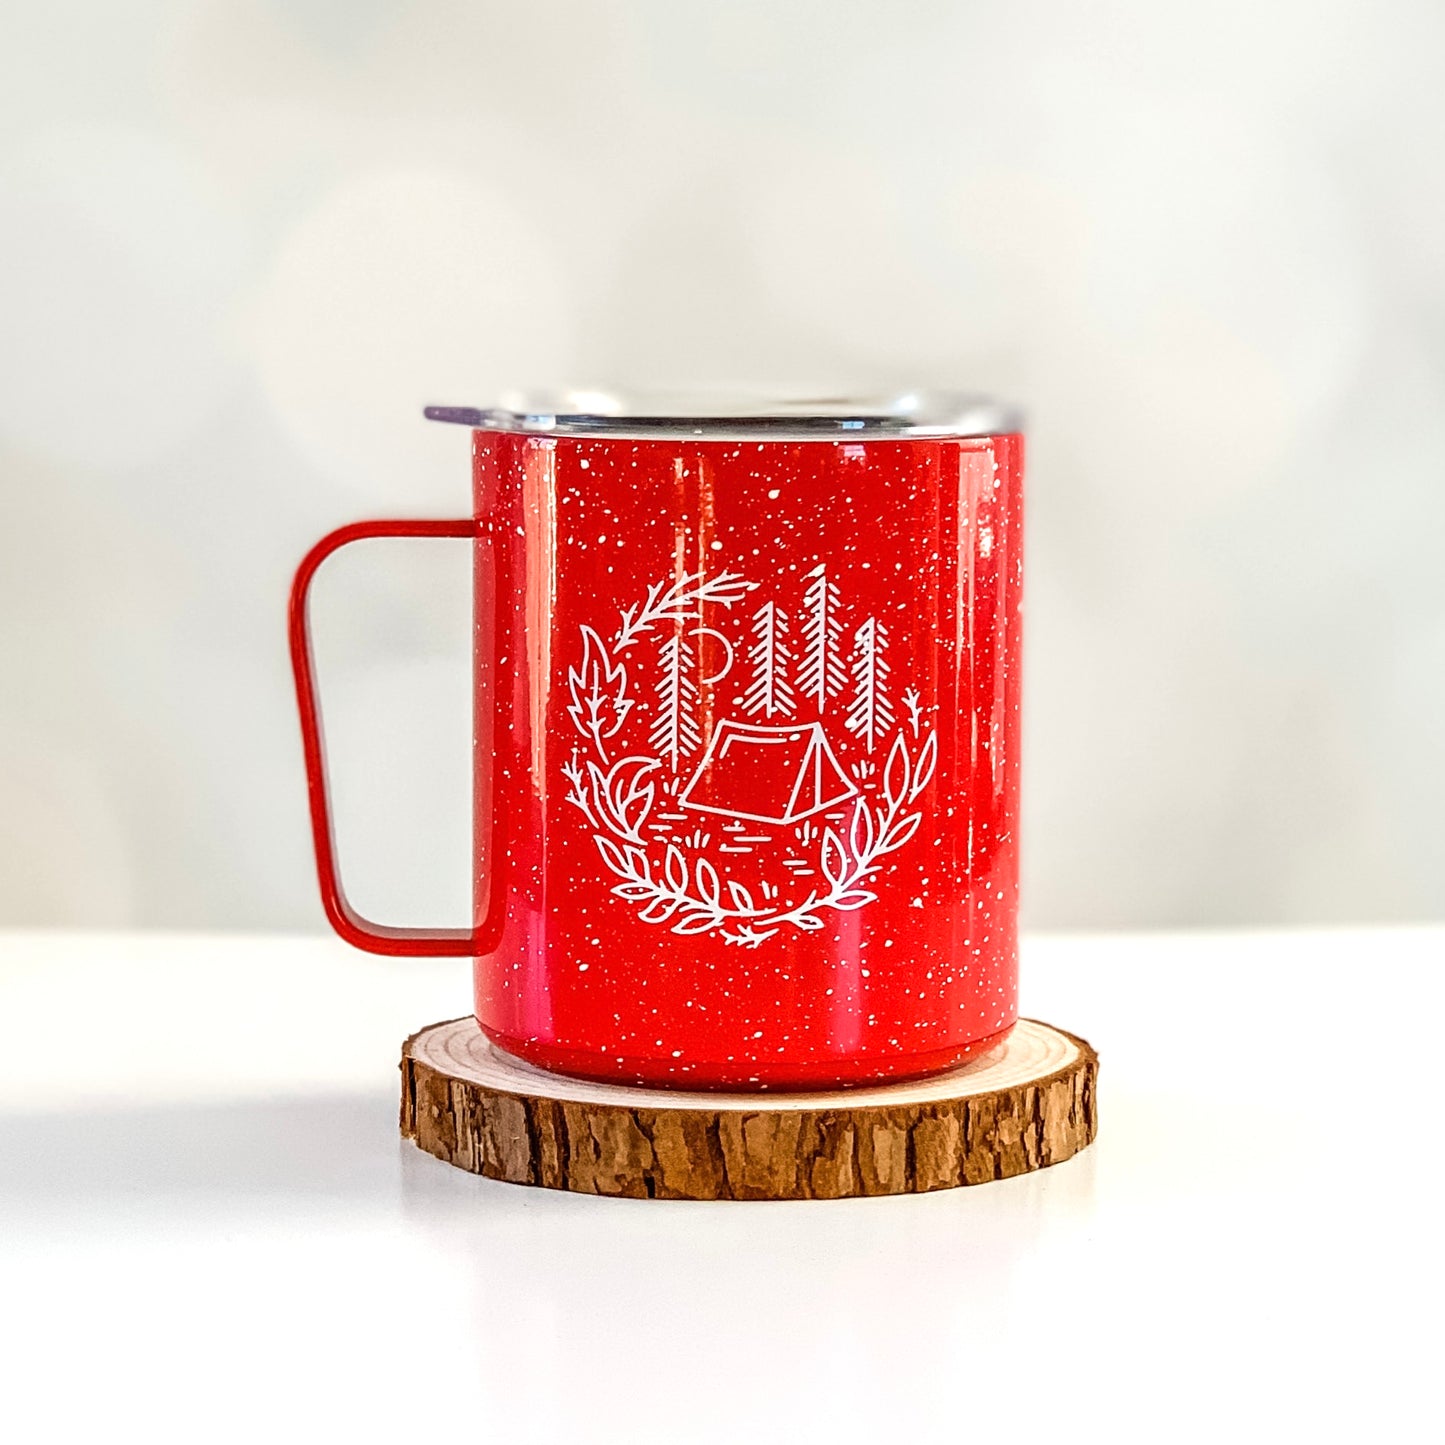 In The Pines Camp Mug in Red